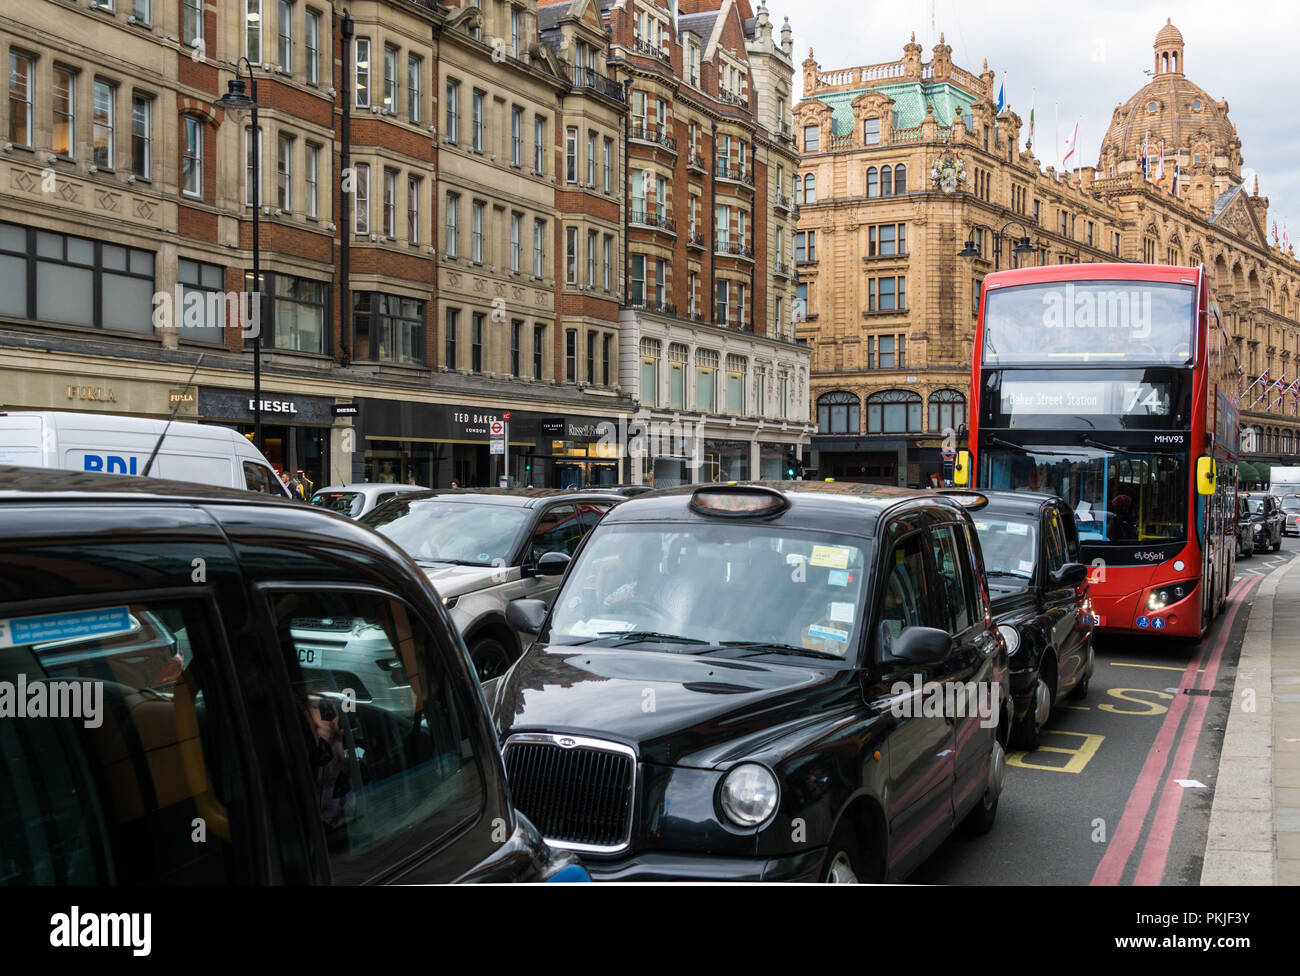 Black taxi cabs on Brompton Road in Knightsbridge with Harrods in the background, London England United Kingdom UK Stock Photo